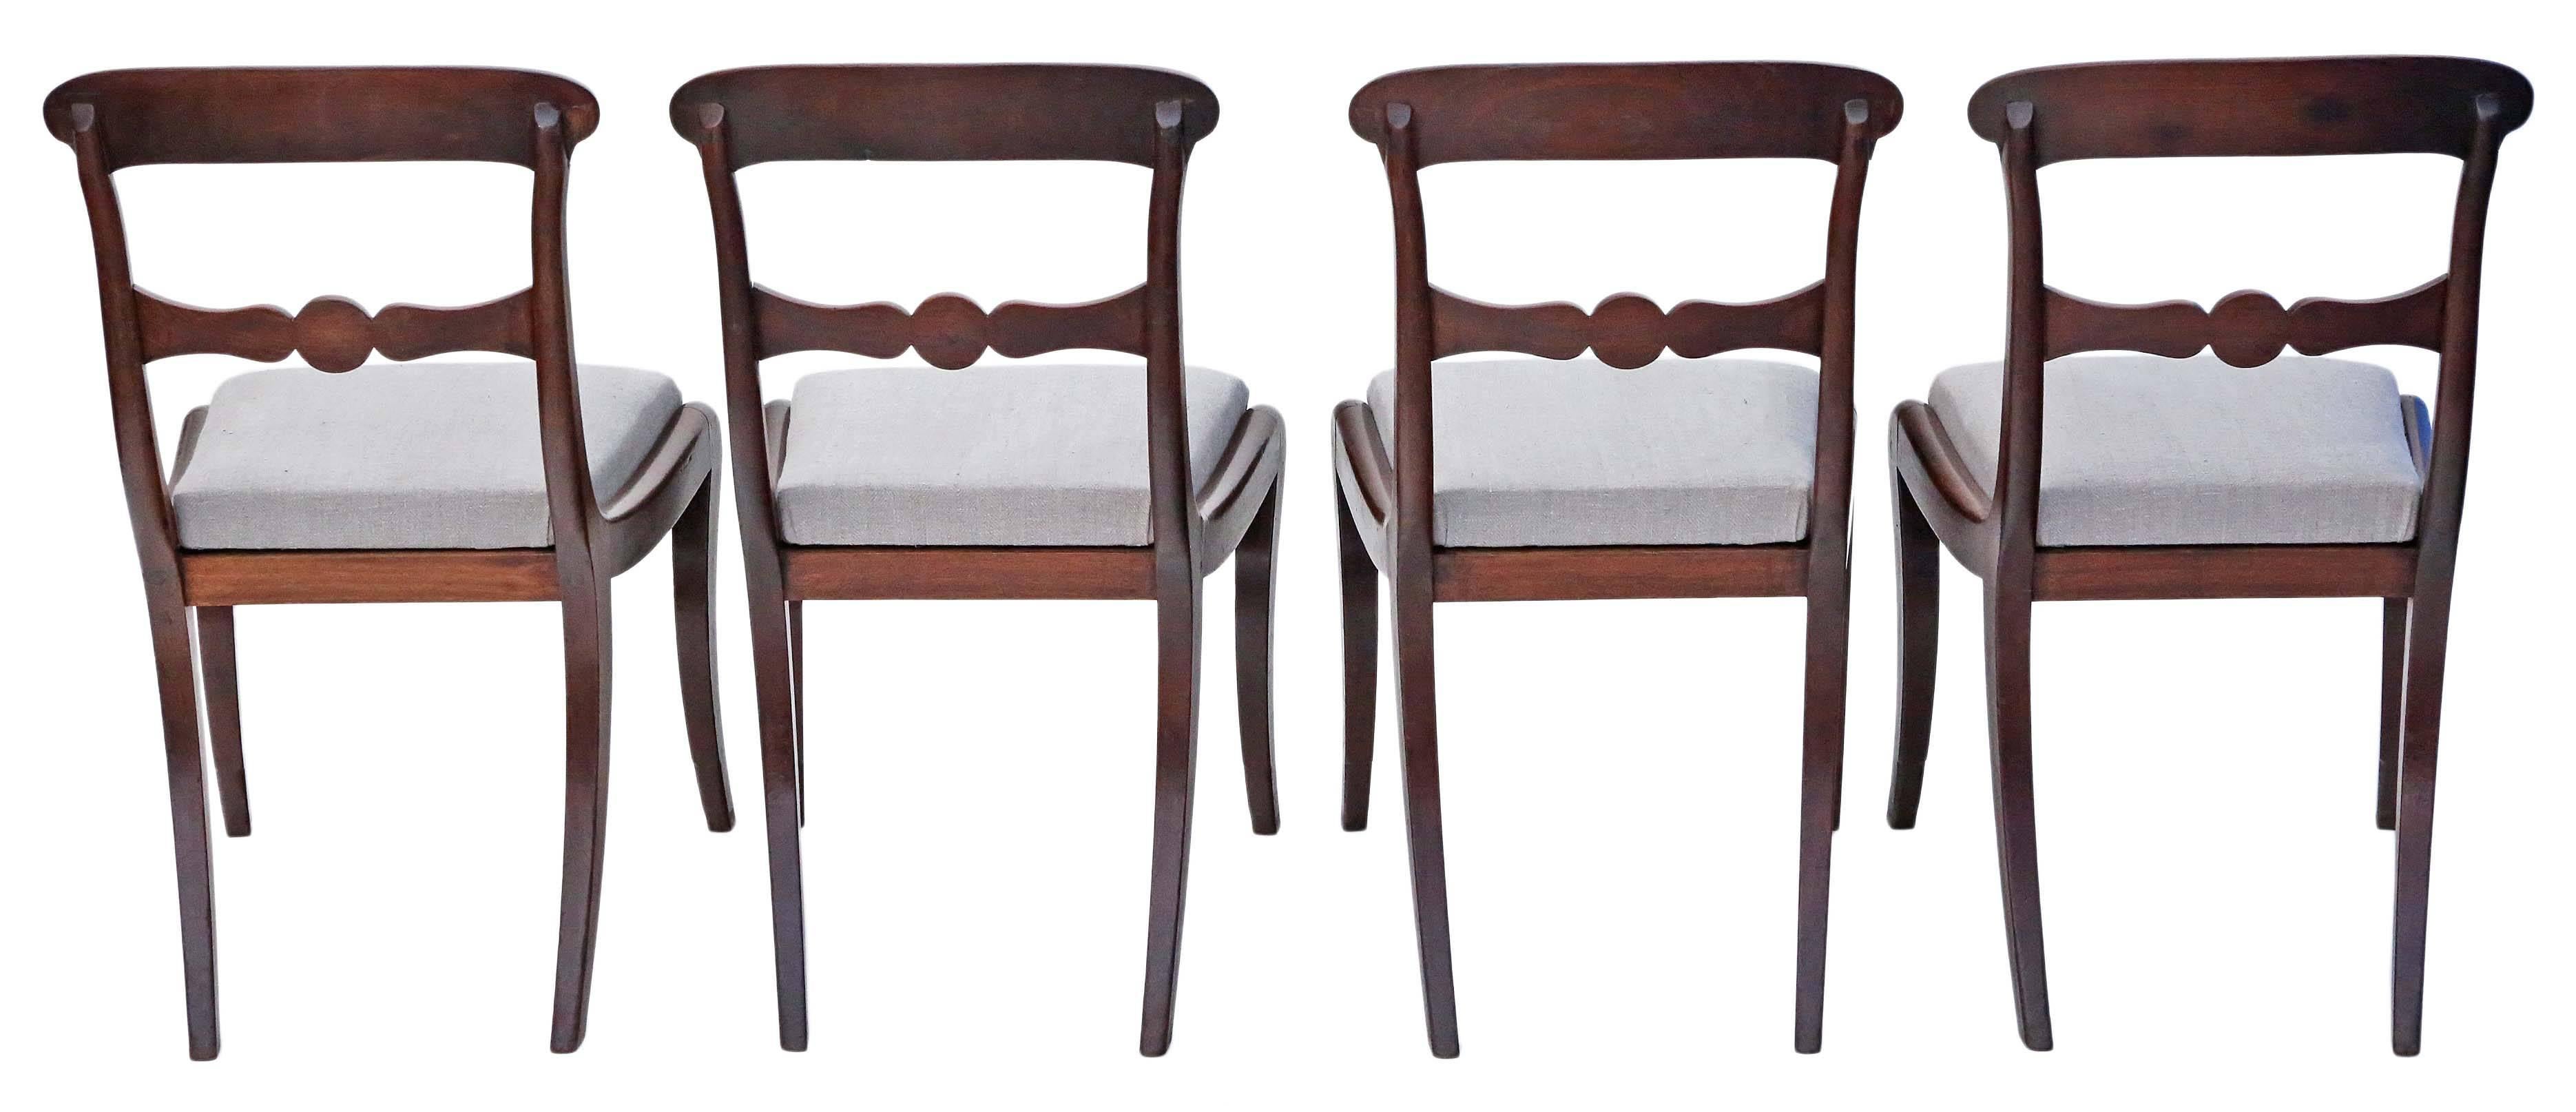 Antique rare set of four mahogany Georgian Regency dining chairs.

Date from circa 1800-1830. Fantastic age, color and patina. Great sabre legs and simple carving to the backs.

Solid and strong with no loose joints.

Good new reupholstery job